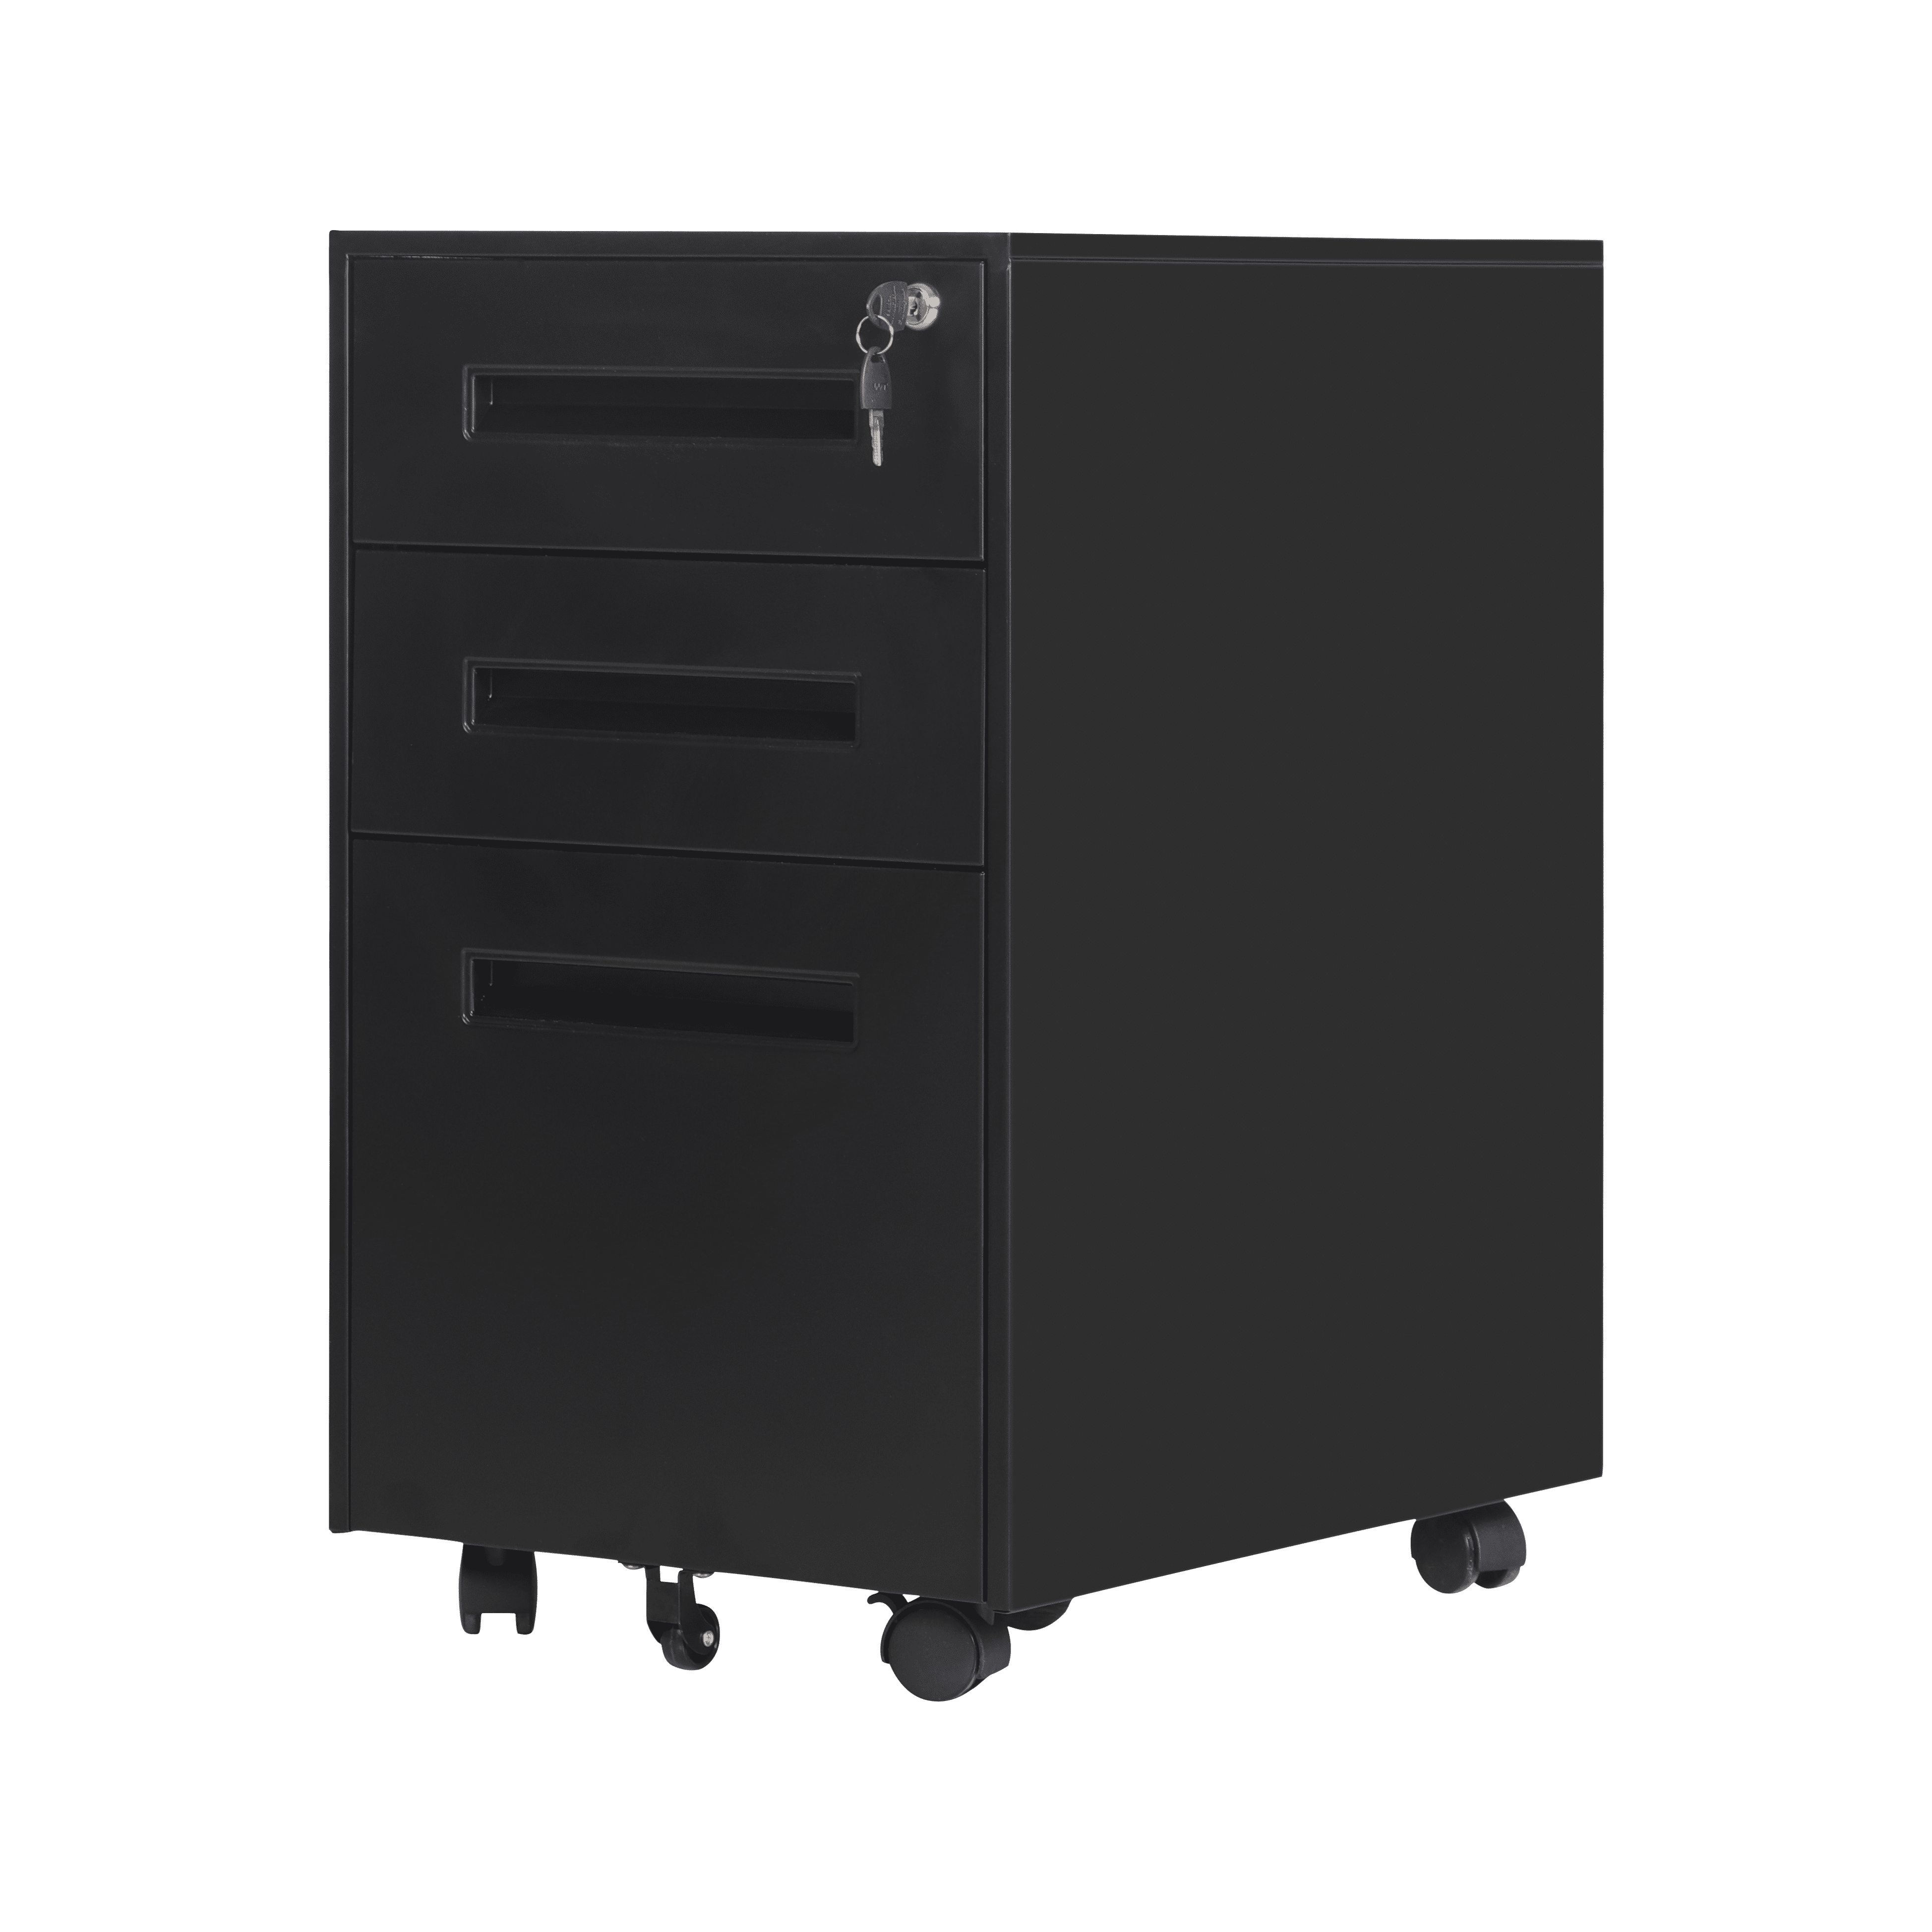 Carrot Merax 3 Drawer Mobile File Cabinet Metal Solid Storage File Cabinet with Keys